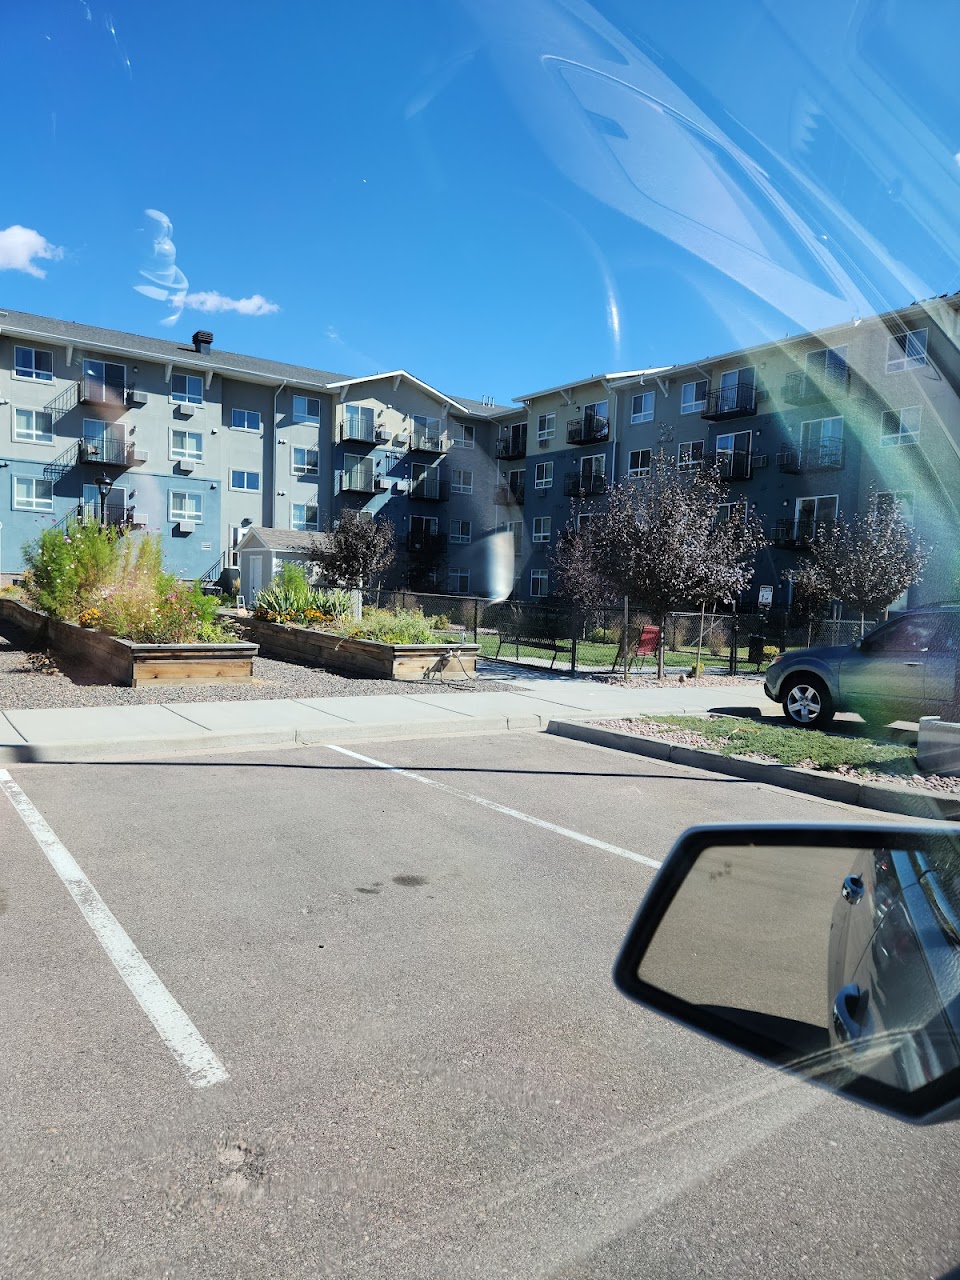 Photo of TRADITIONS AT COLORADO SPRINGS. Affordable housing located at 6010 TUTT BLVD COLORADO SPRINGS, CO 80923